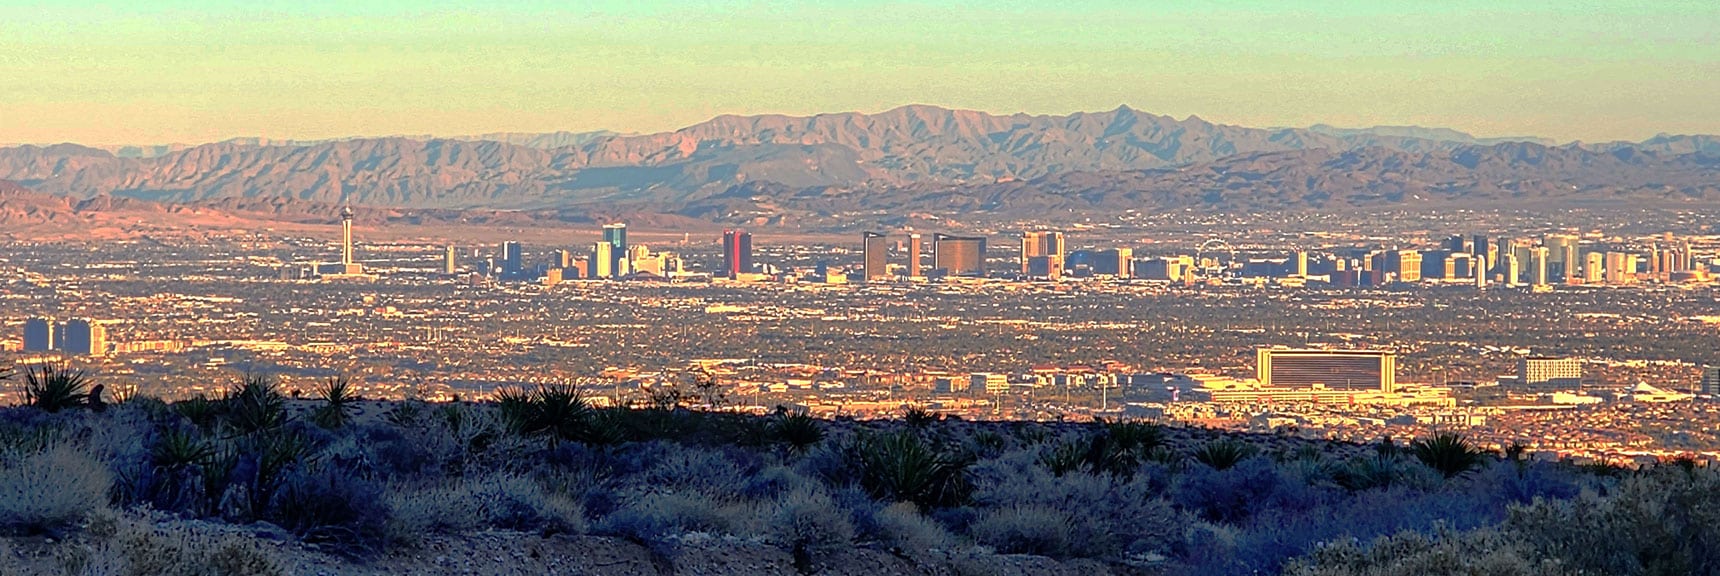 Beautiful Views of Las Vegas Strip Lit by Late Afternoon Sun. | 3 Basin Circuit | Calico Basin, Brownstone Basin, Red Rock Canyon, Nevada